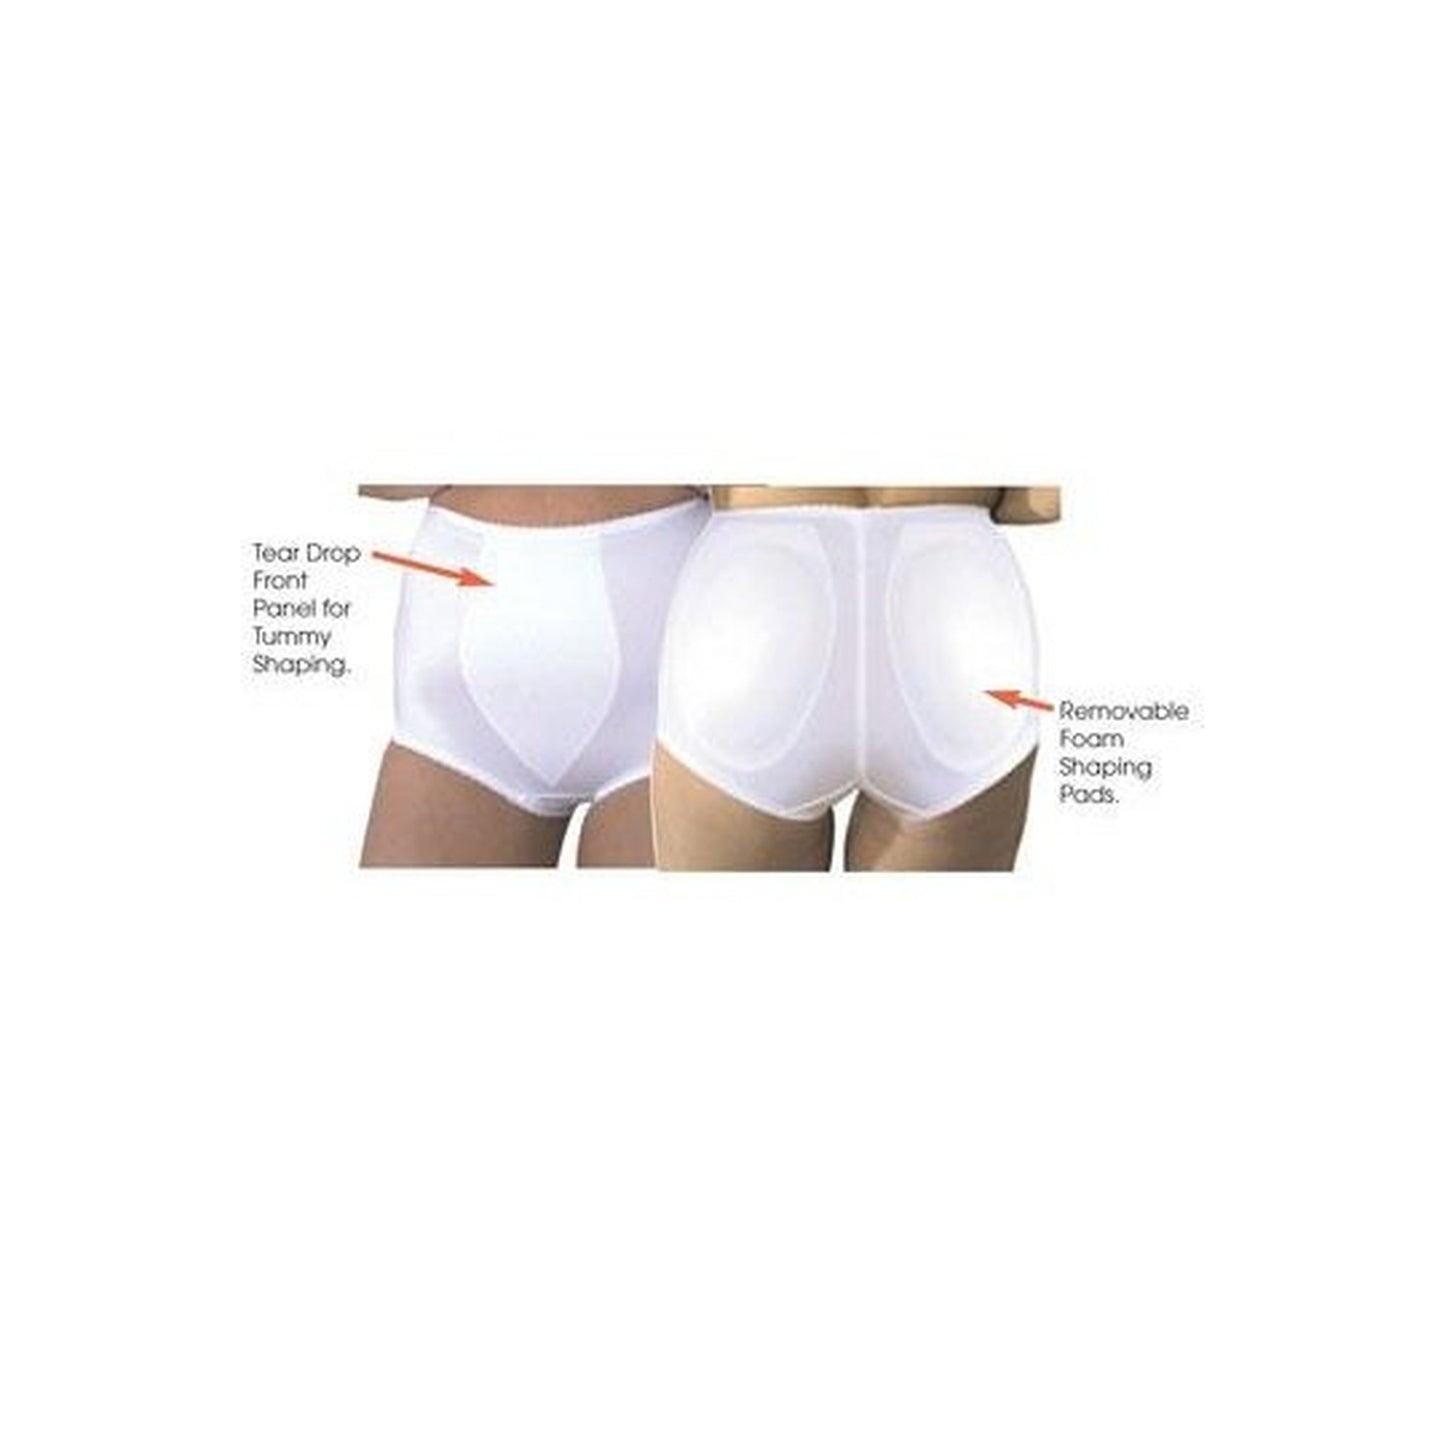 Panty Brief Light Shaping/Removable Pads